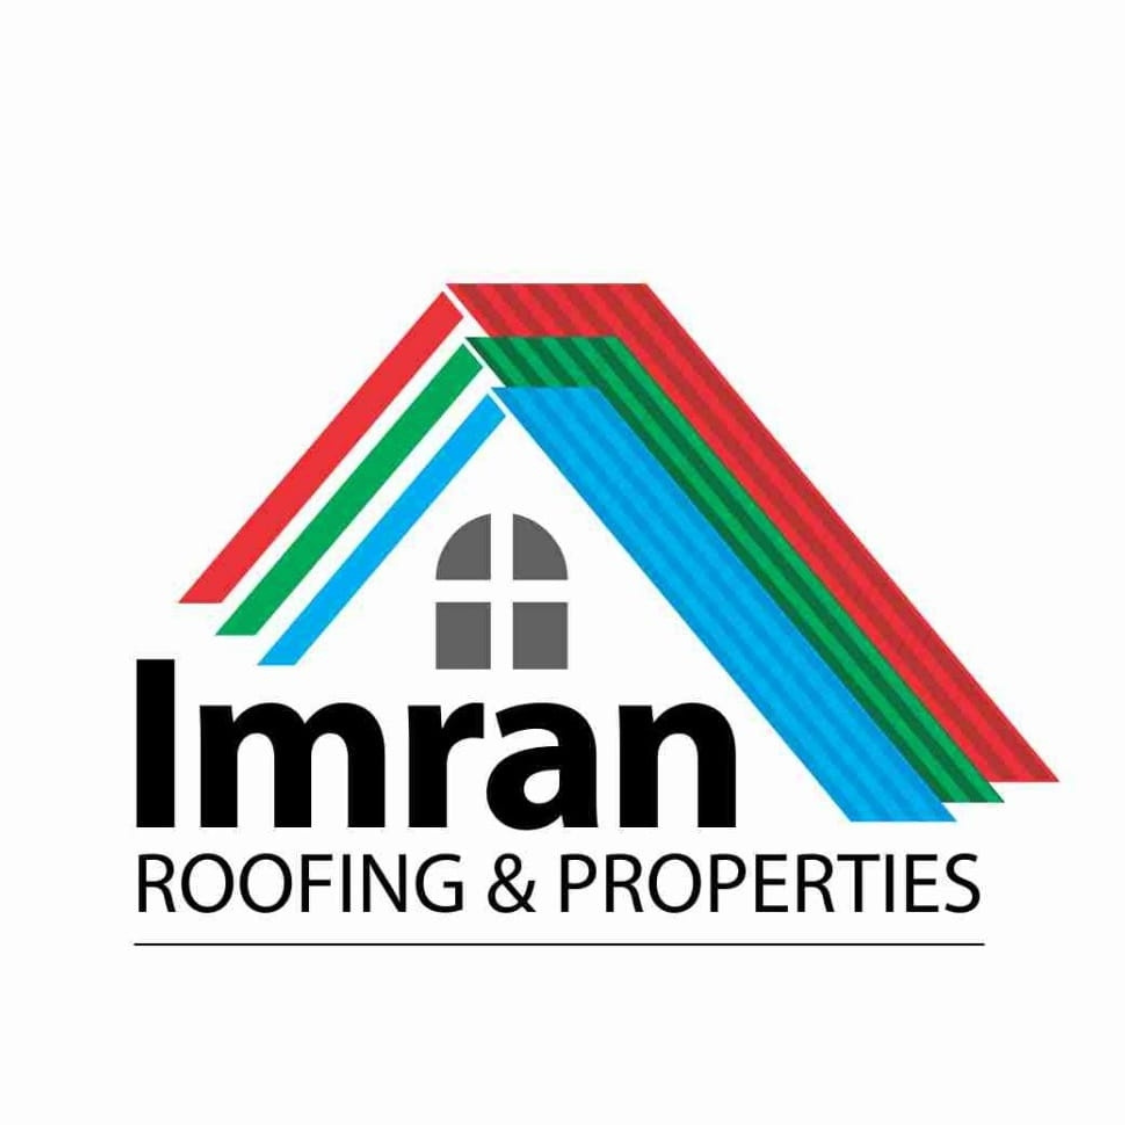 Imran roofing | Best Roofing Company In Nigeria 